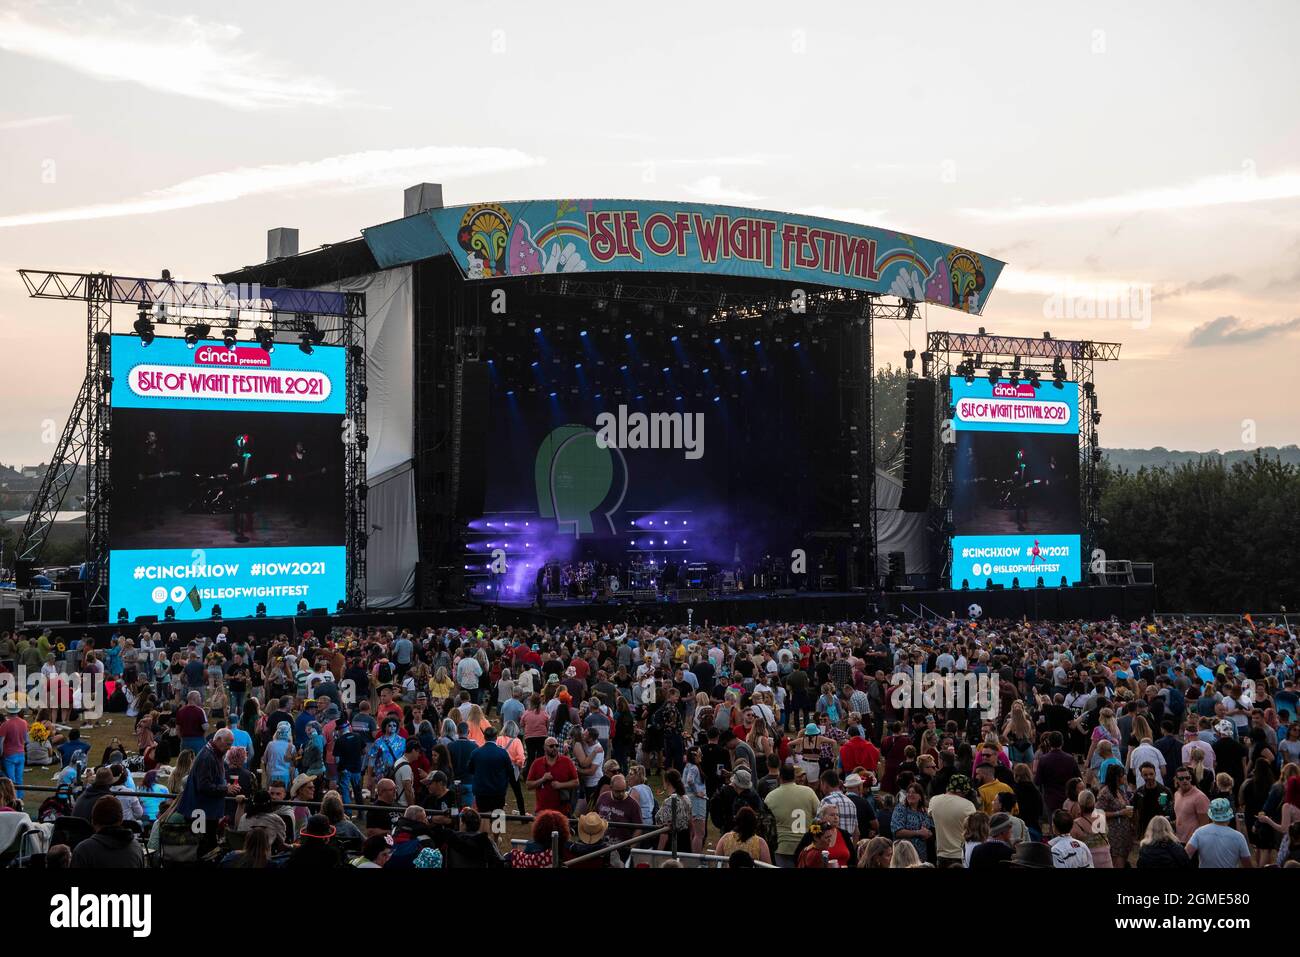 Newport, Isle of Wight, UK, Friday, 17th September 2021 View of the MainStage as the sun sets at the Isle of Wight festival Seaclose Park. Credit: DavidJensen / Empics Entertainment / Alamy Live News Stock Photo